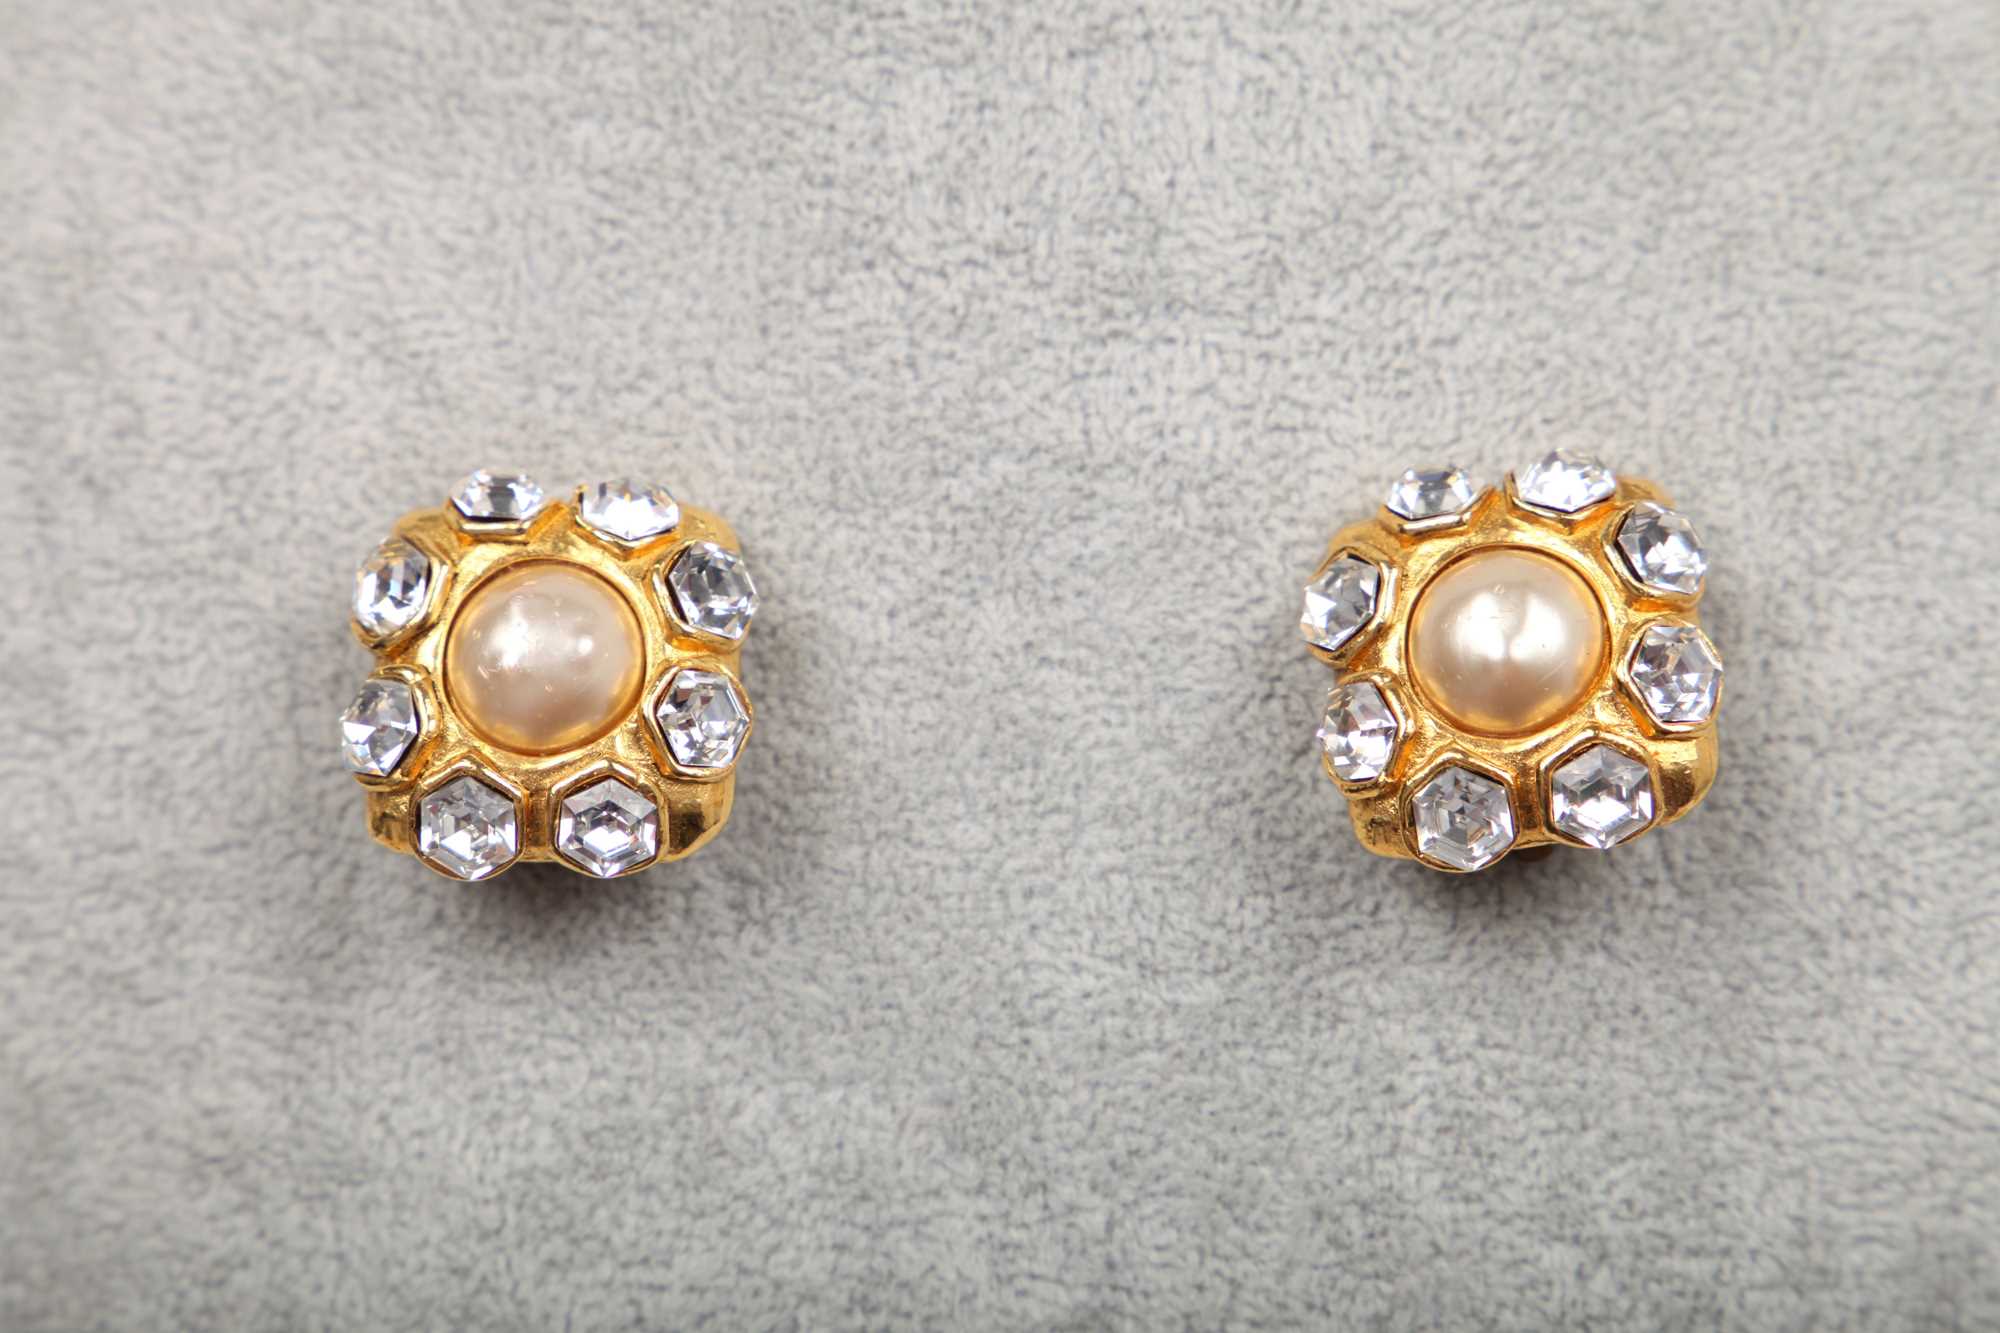 Lot 23 - A pair of Chanel gilt metal earrings with cut brilliants, circa 1990